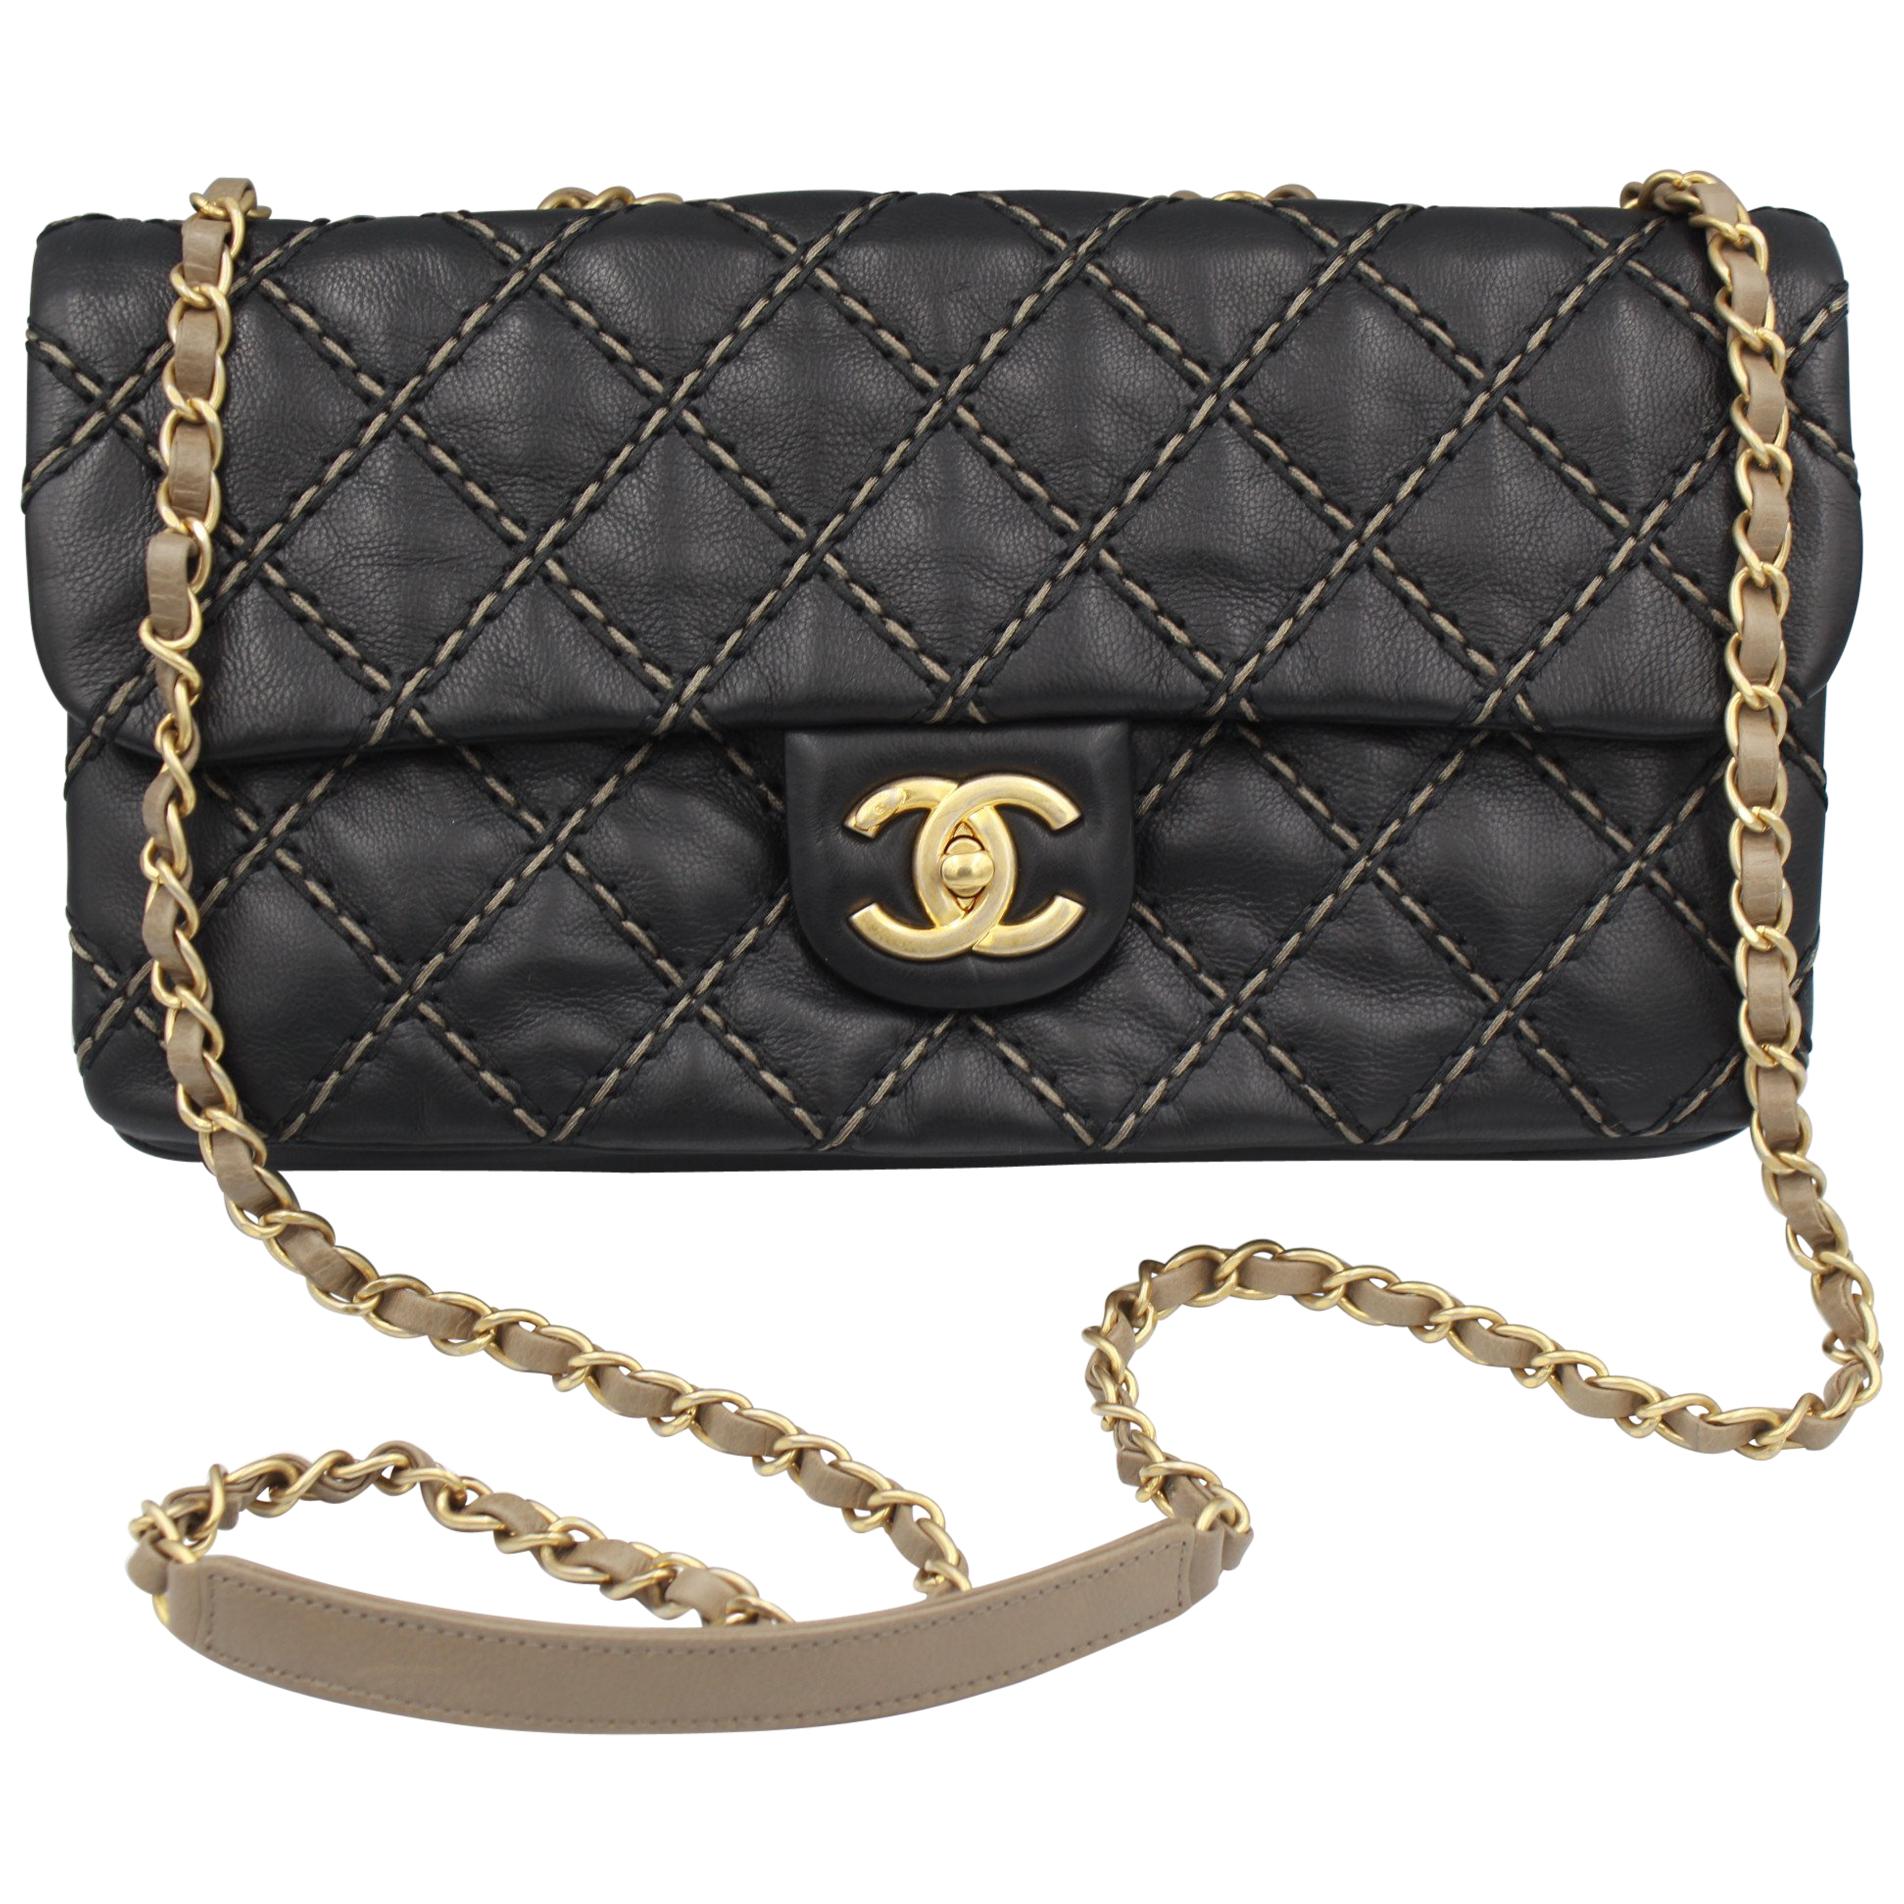 Chanel 2014 Black Stiched Timeless  Bag with back Zipped Pocket